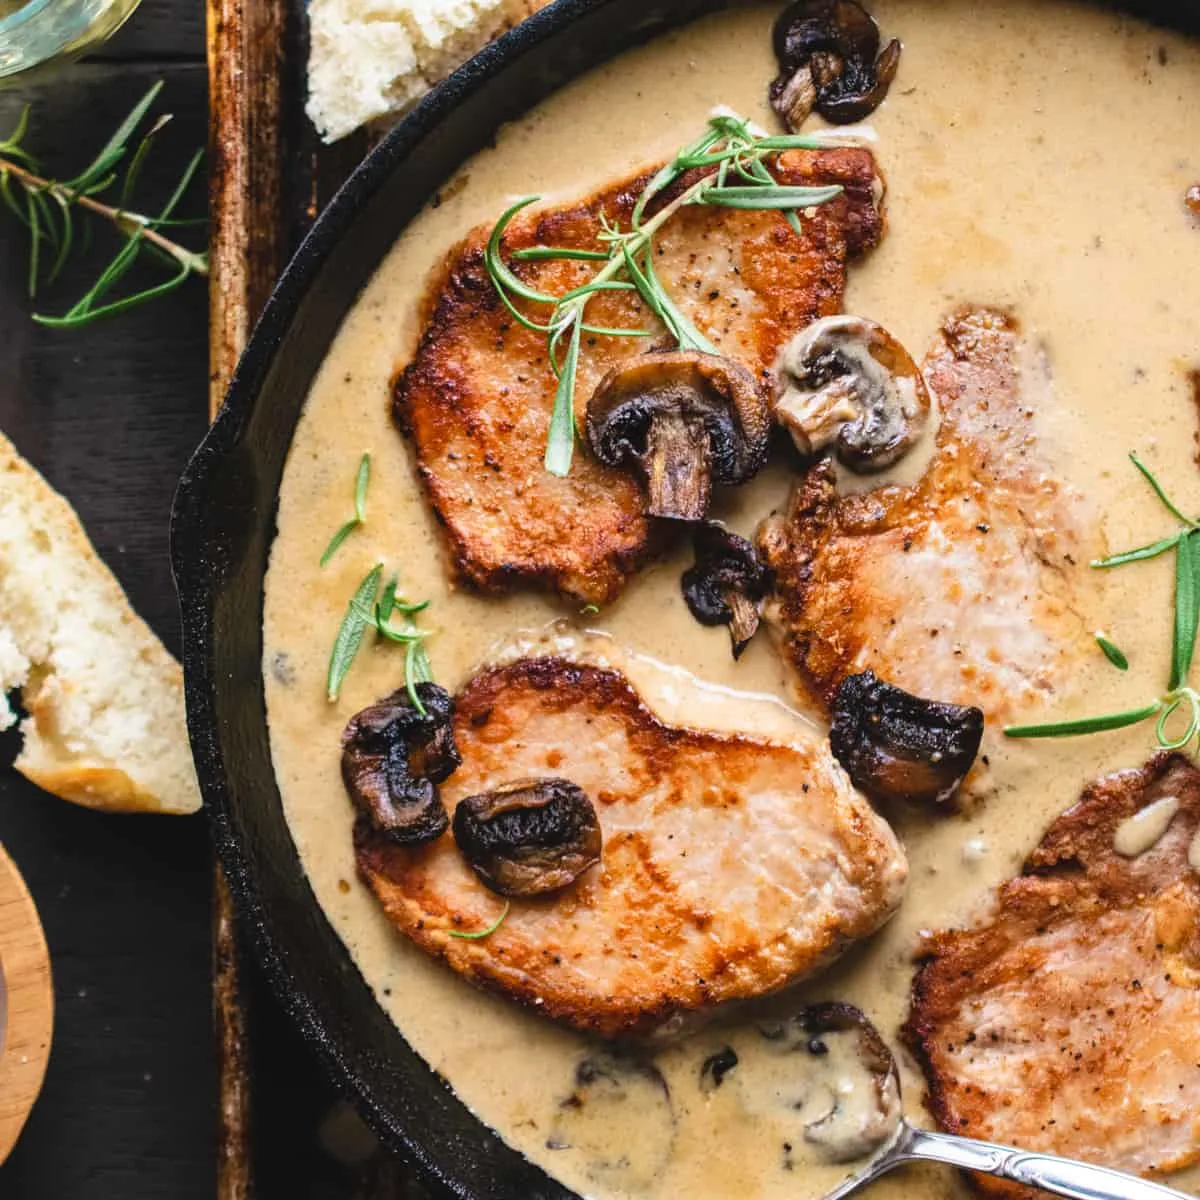 Pork chops in an iron skillet with mushrooms, sauce and herbs.